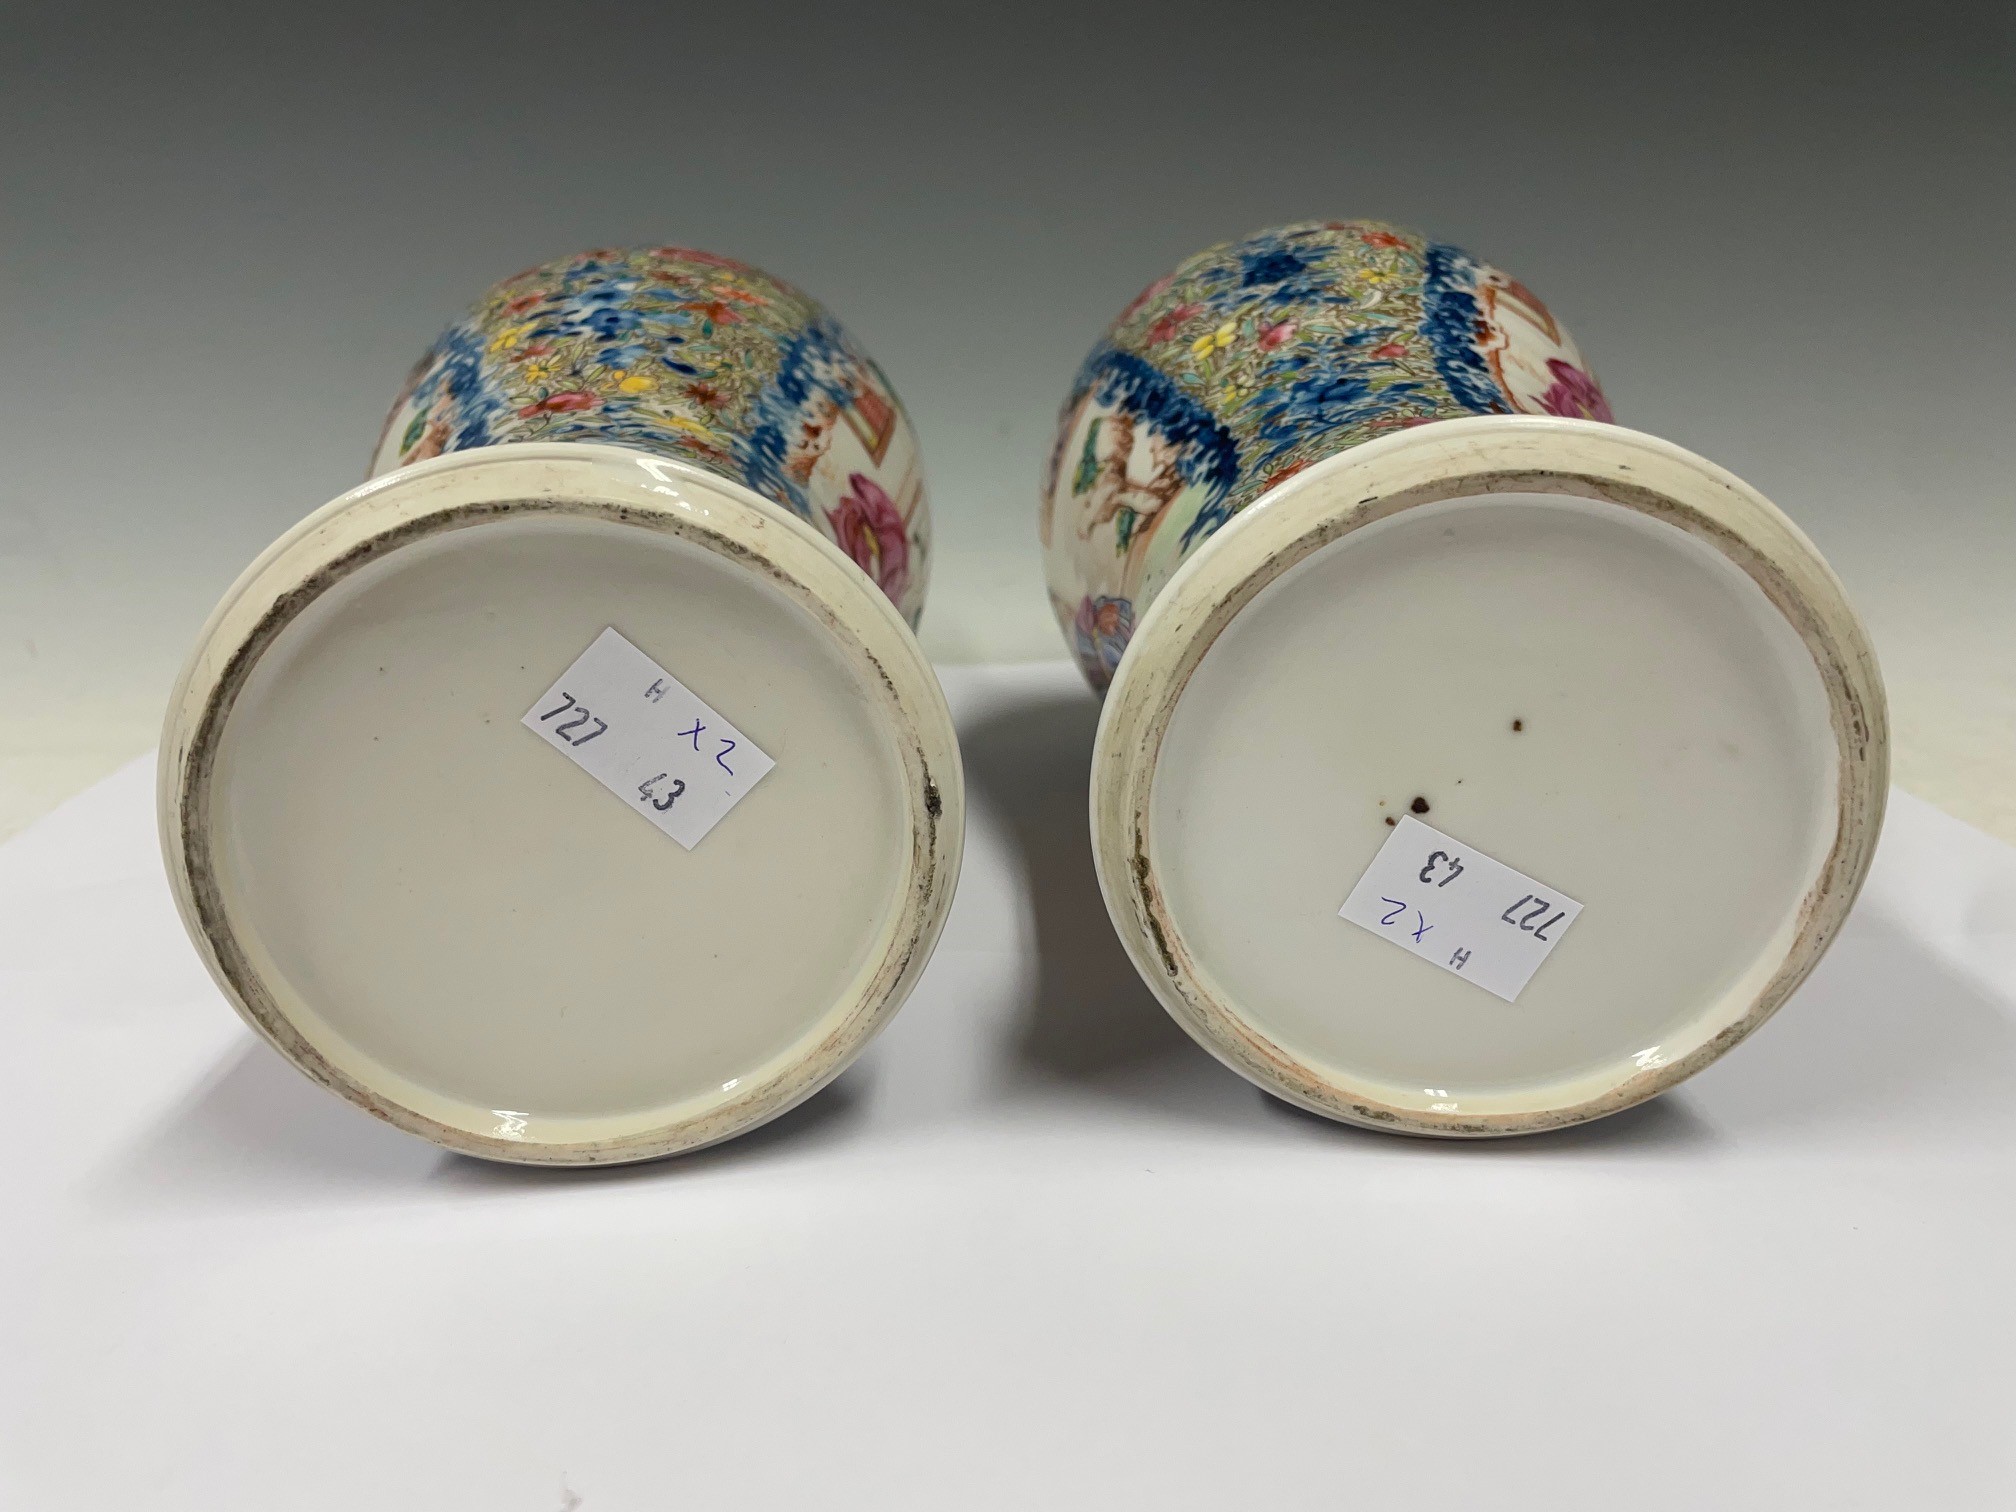 A PAIR OF CHINESE PORCELAIN BLUE AND WHITE JARS AND COVERS, QING DYNASTY, WITH FAMILLE ROSE ENAMEL - Image 7 of 7